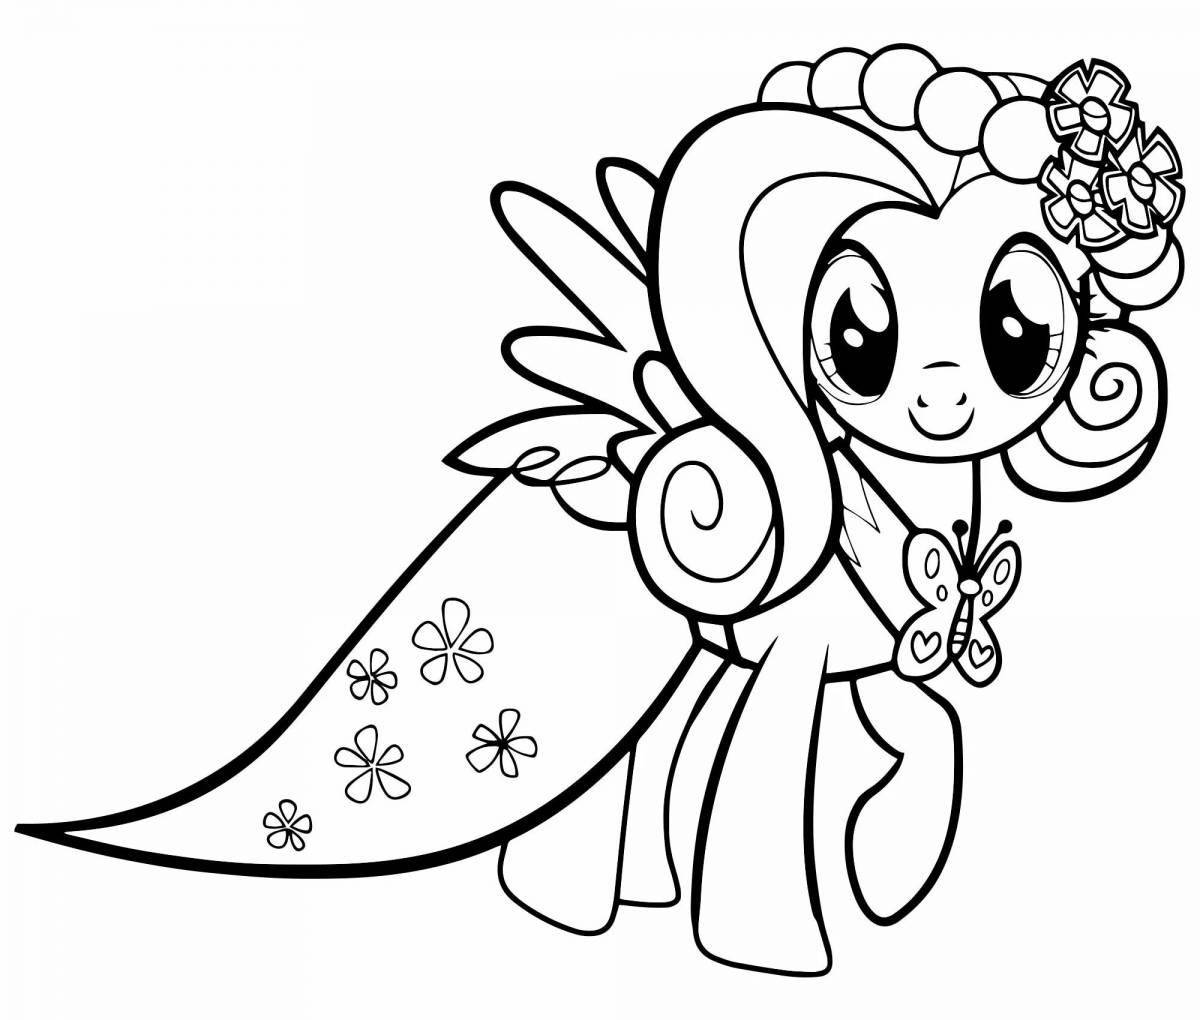 Playful my little pony coloring page for kids